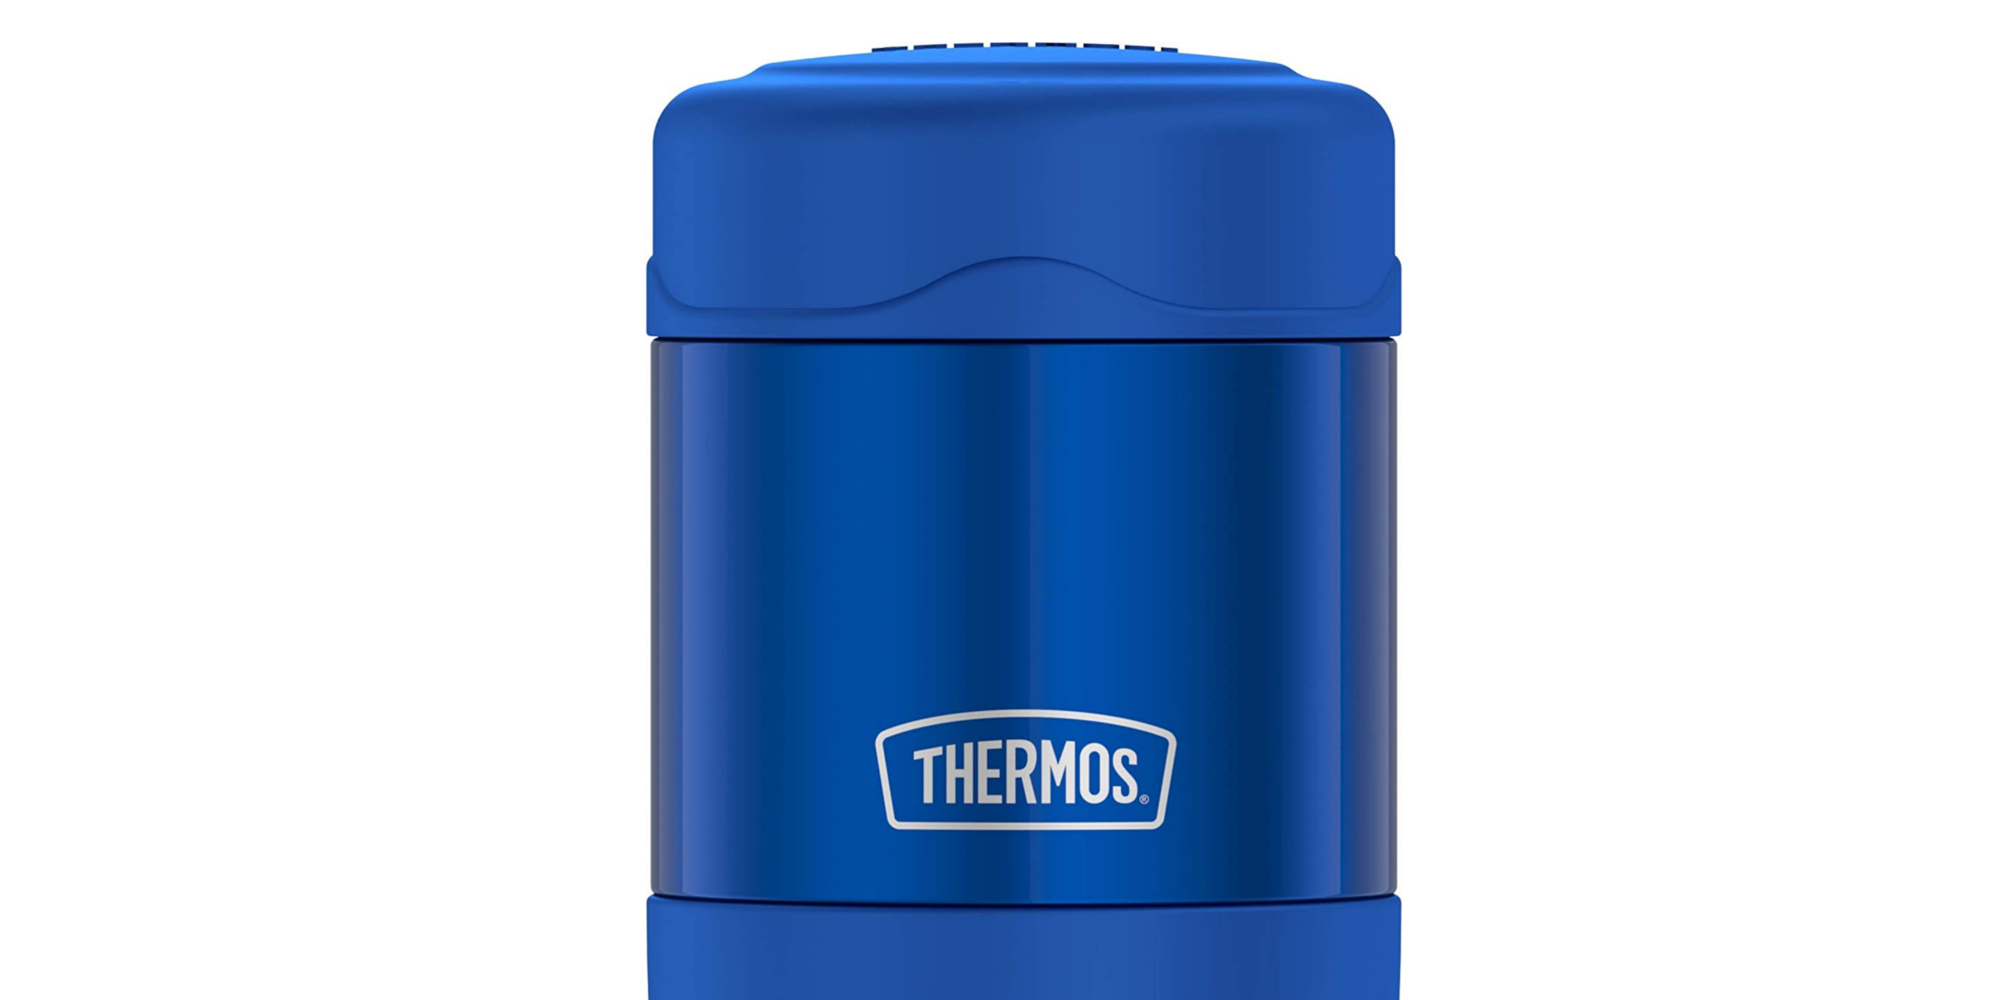 https://9to5toys.com/wp-content/uploads/sites/5/2020/07/Thermos-Funtainer.jpg